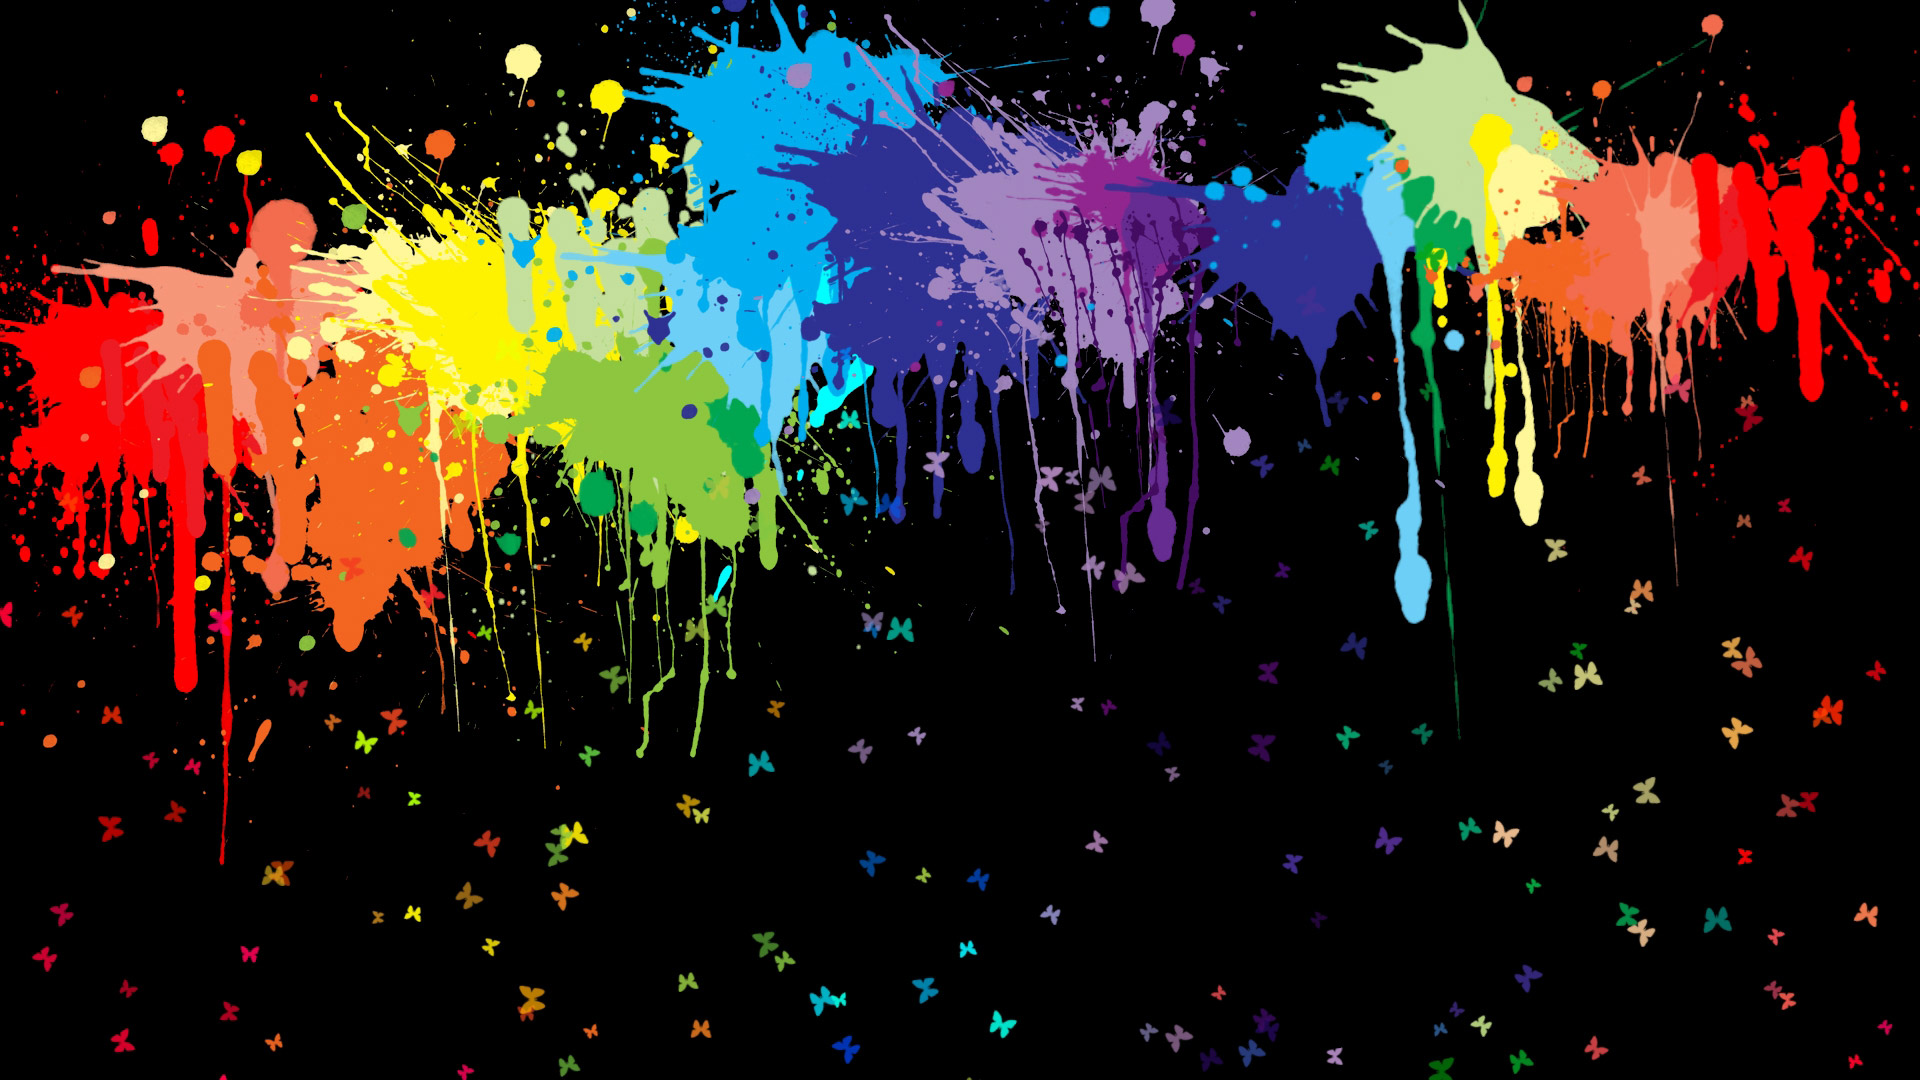 HD Wallpaper Colorful Abstract Wallpaper55 Best